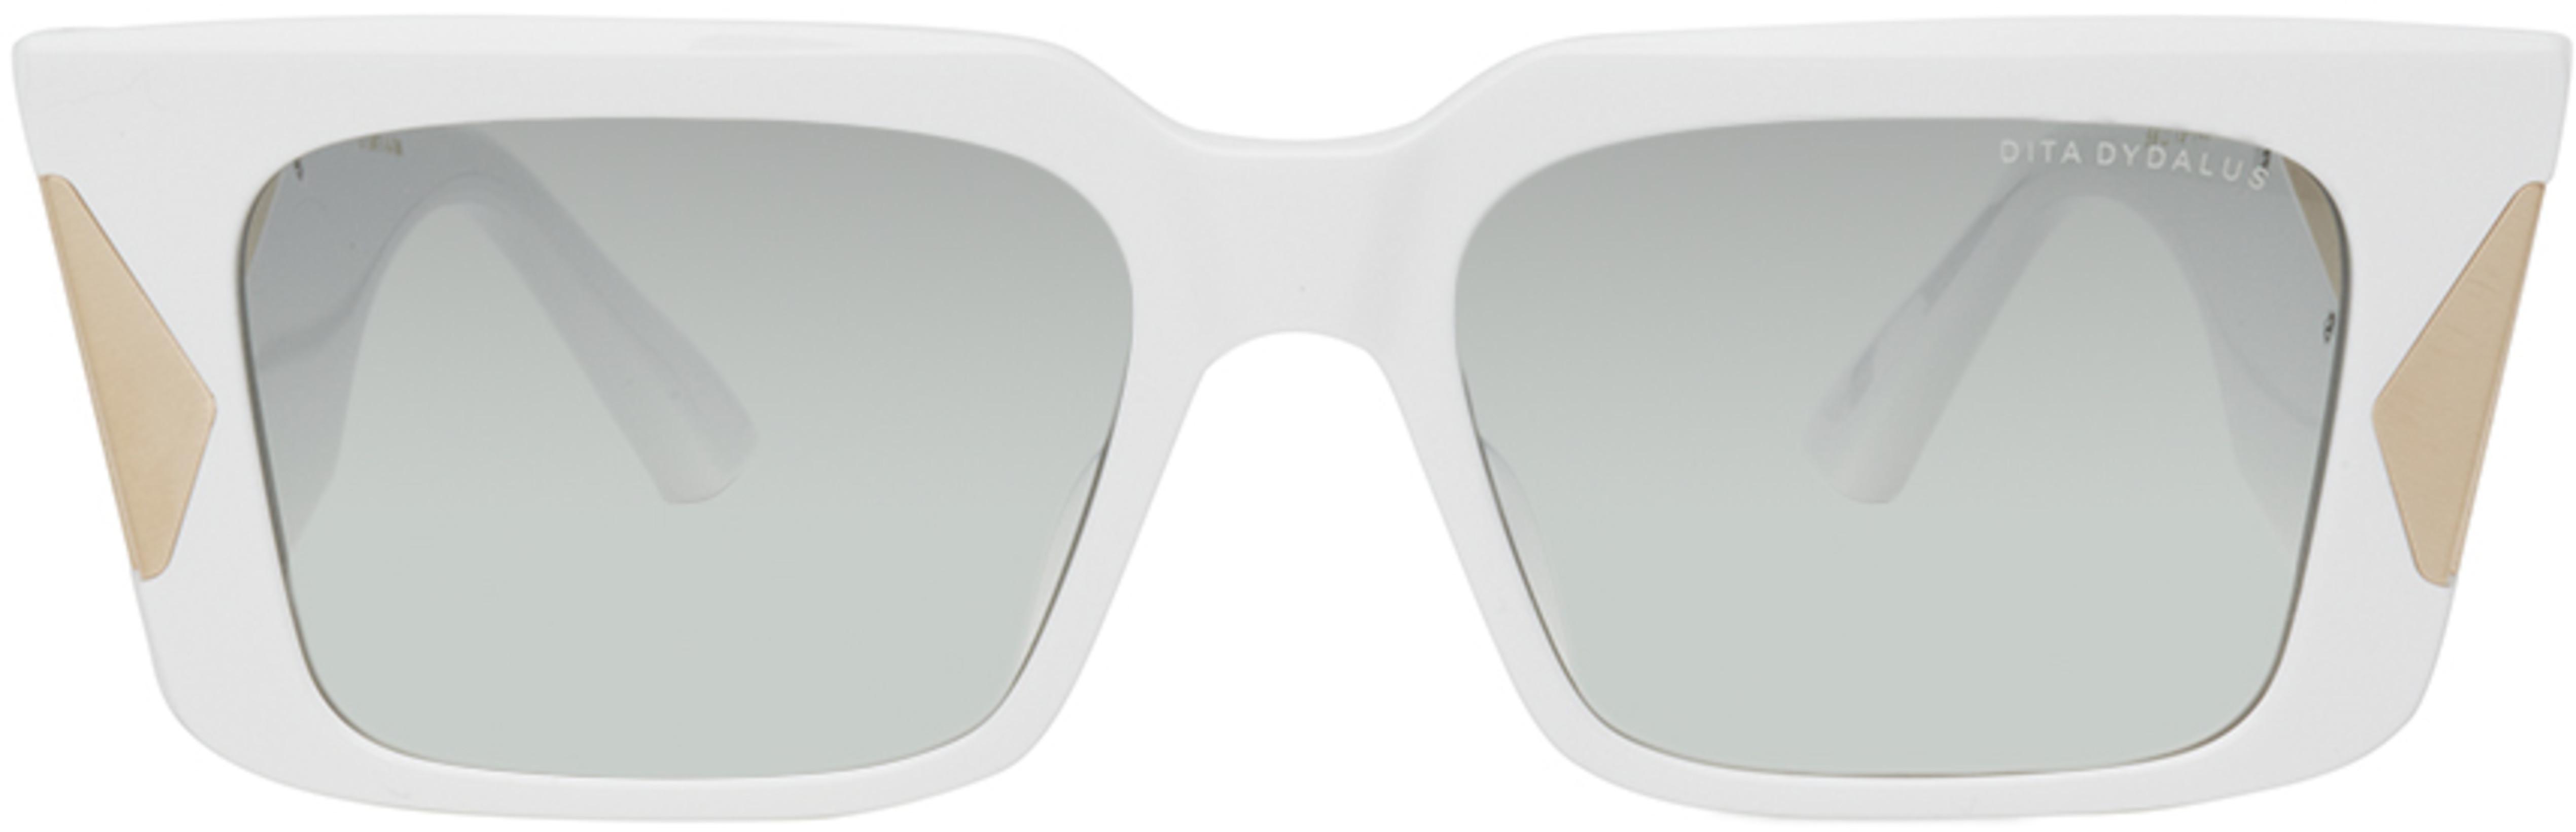 White Limited Edition Dydalus Sunglasses by DITA